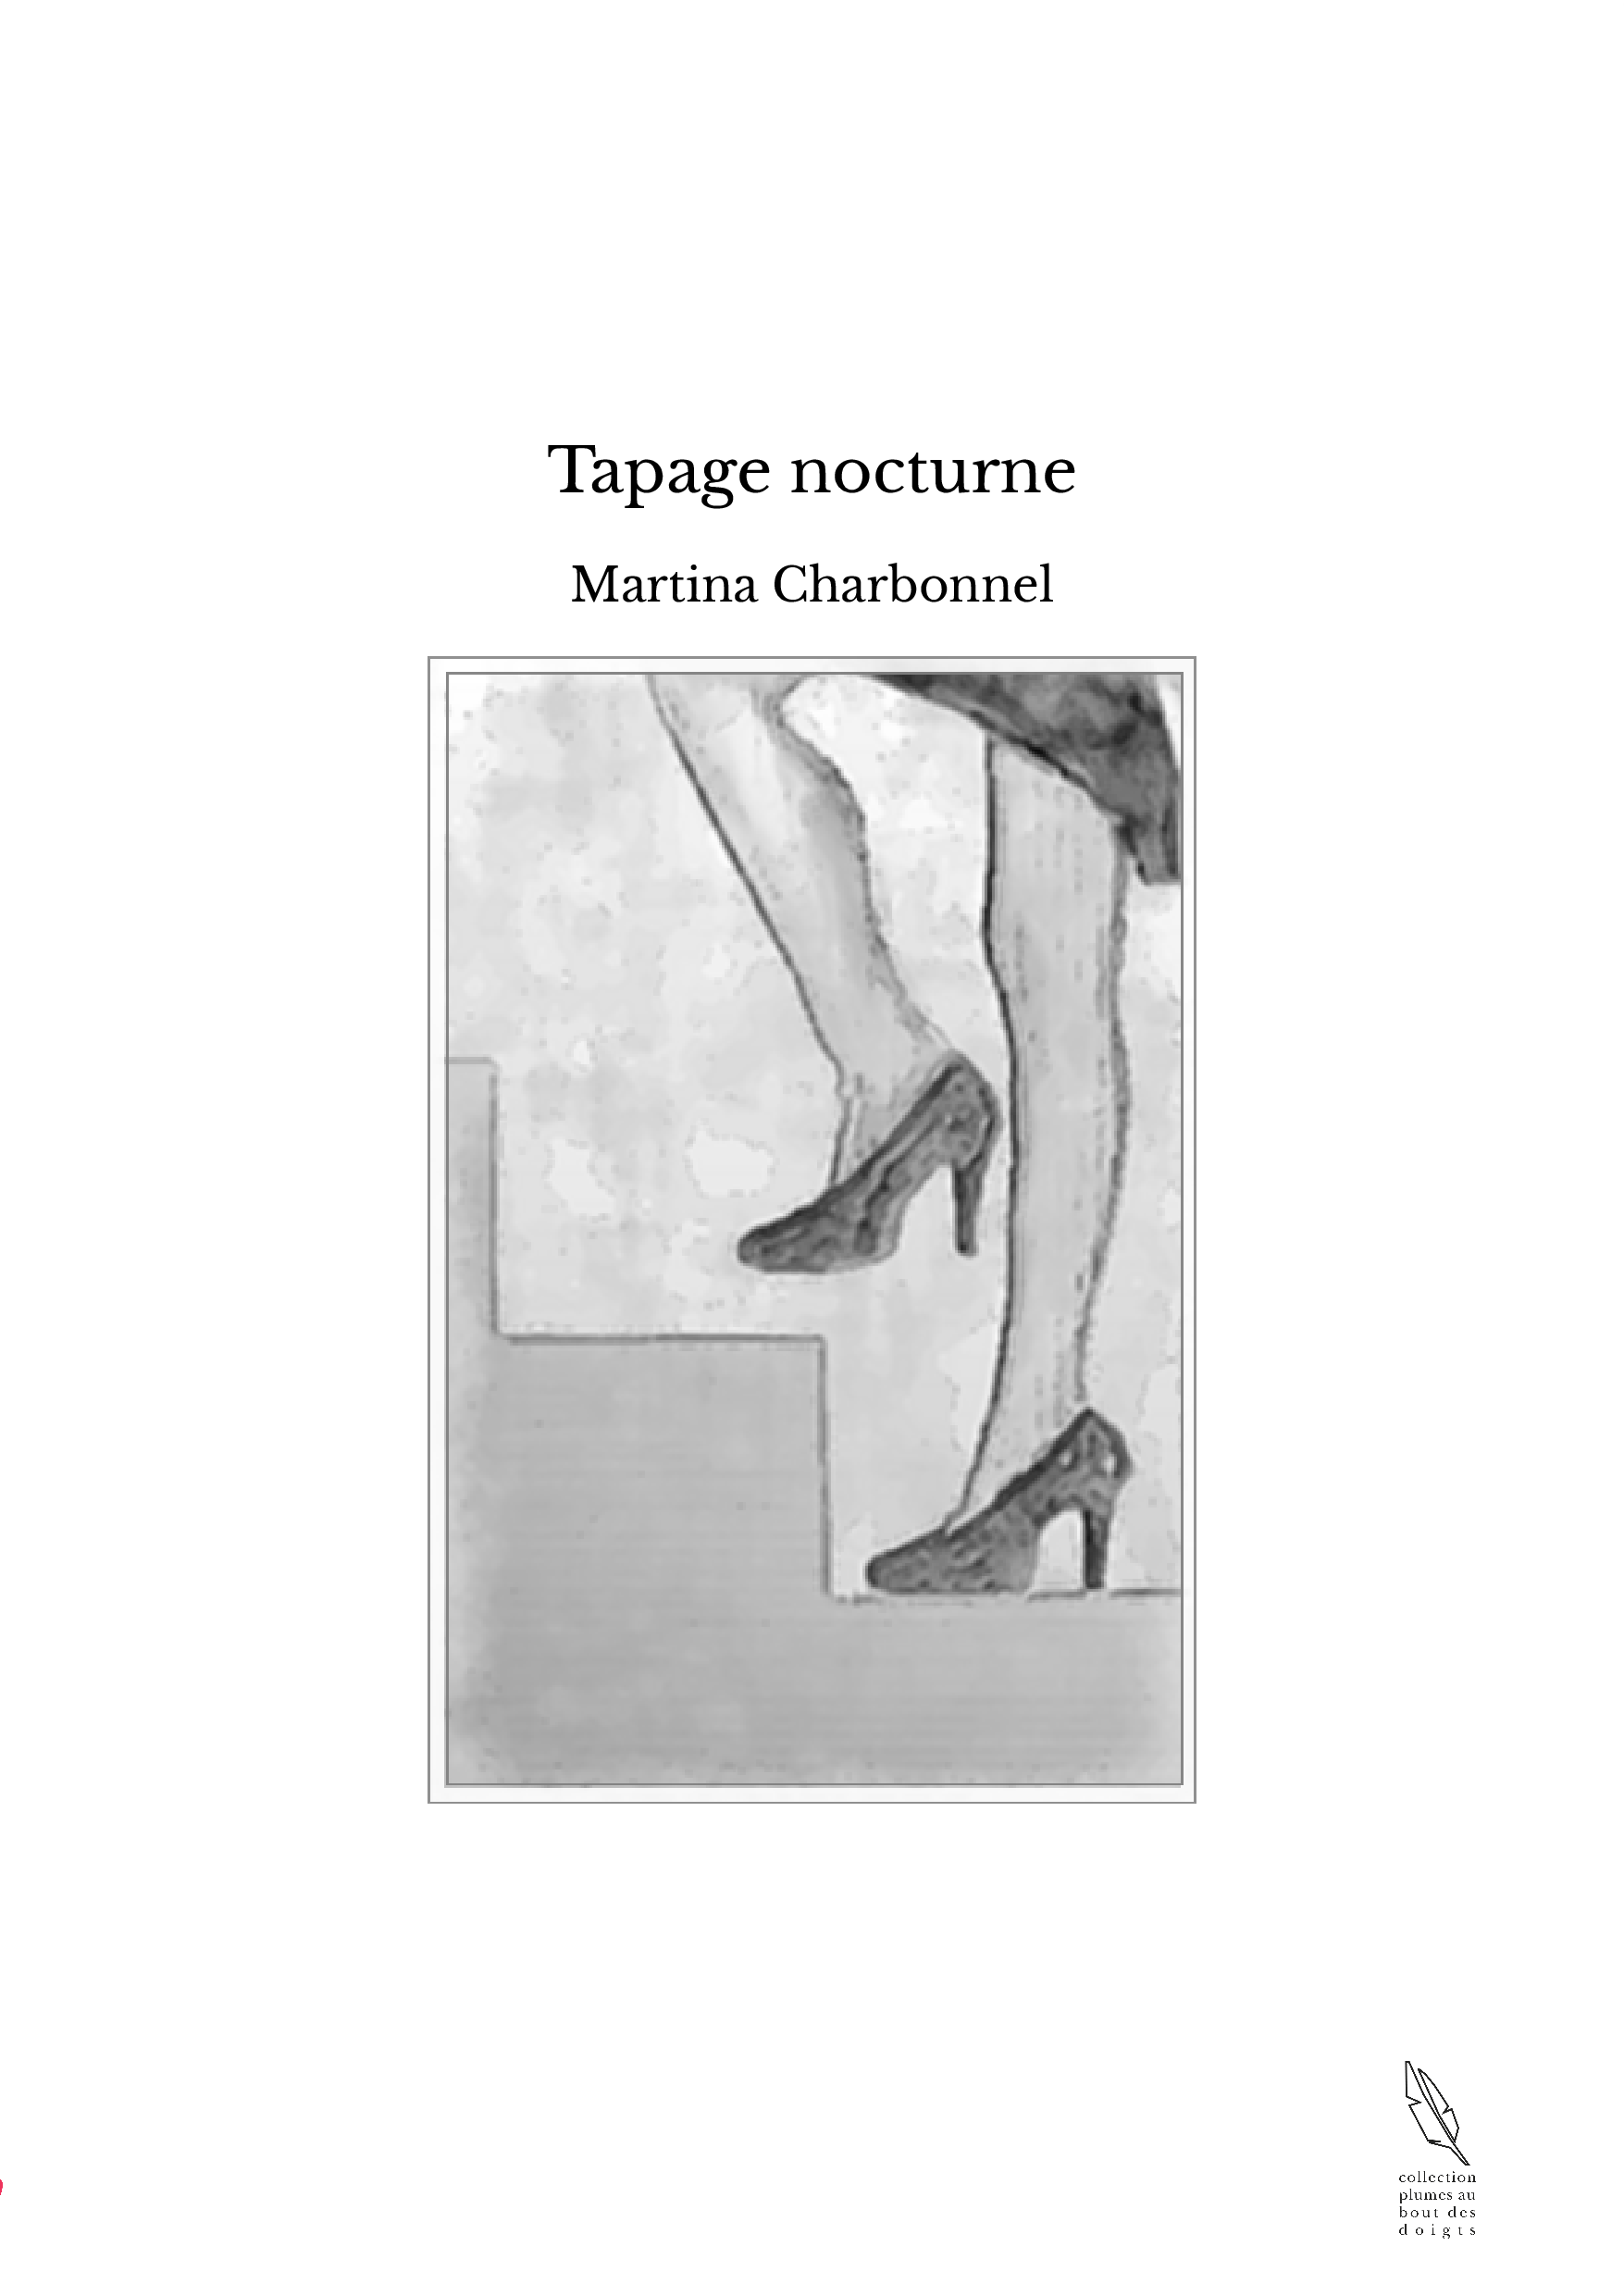 Tapage nocturne - Martina Charbonnel